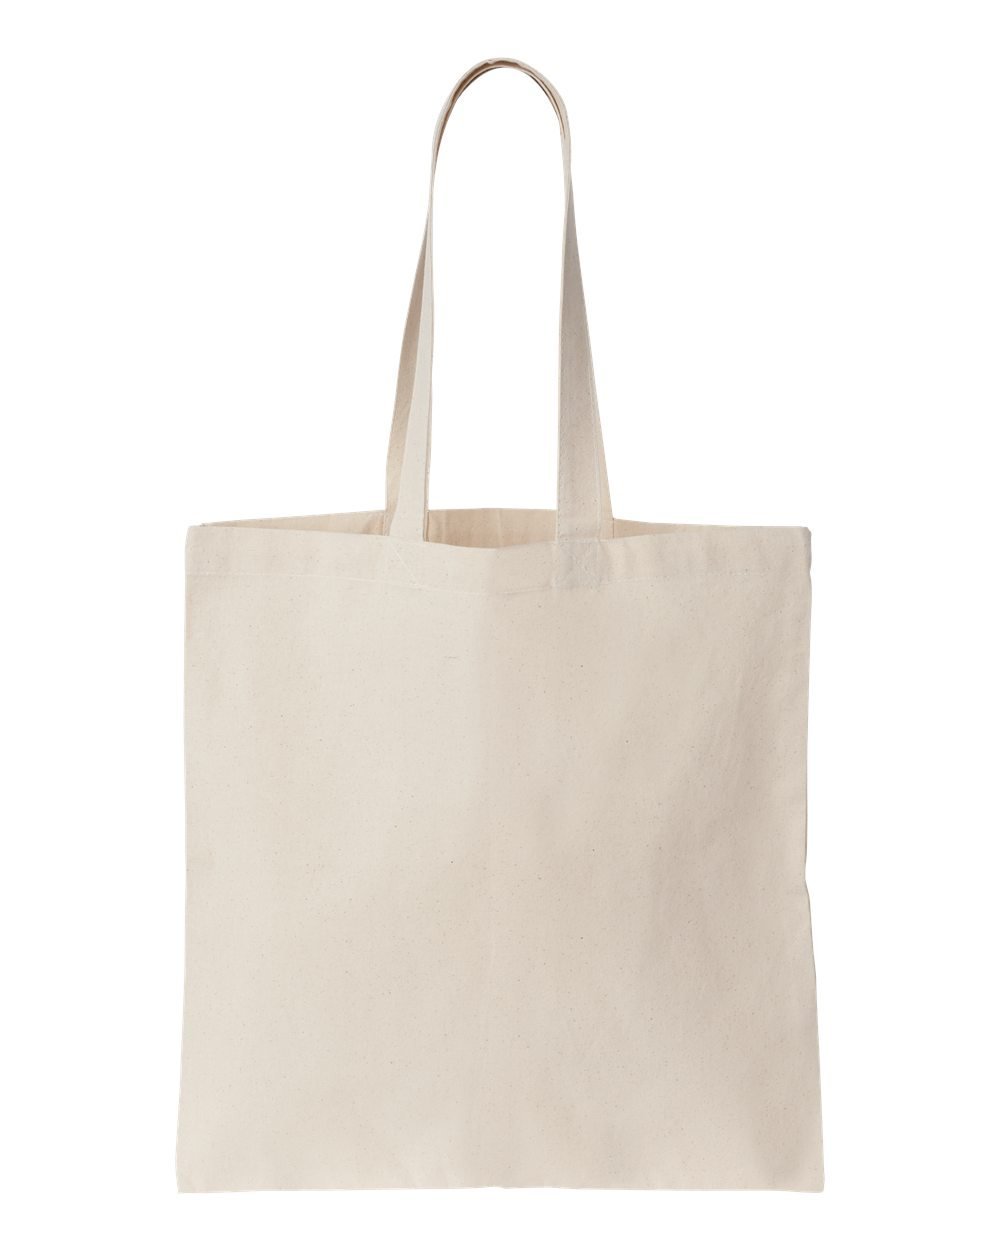 CANVAS A3 SIZE TOTE BAG